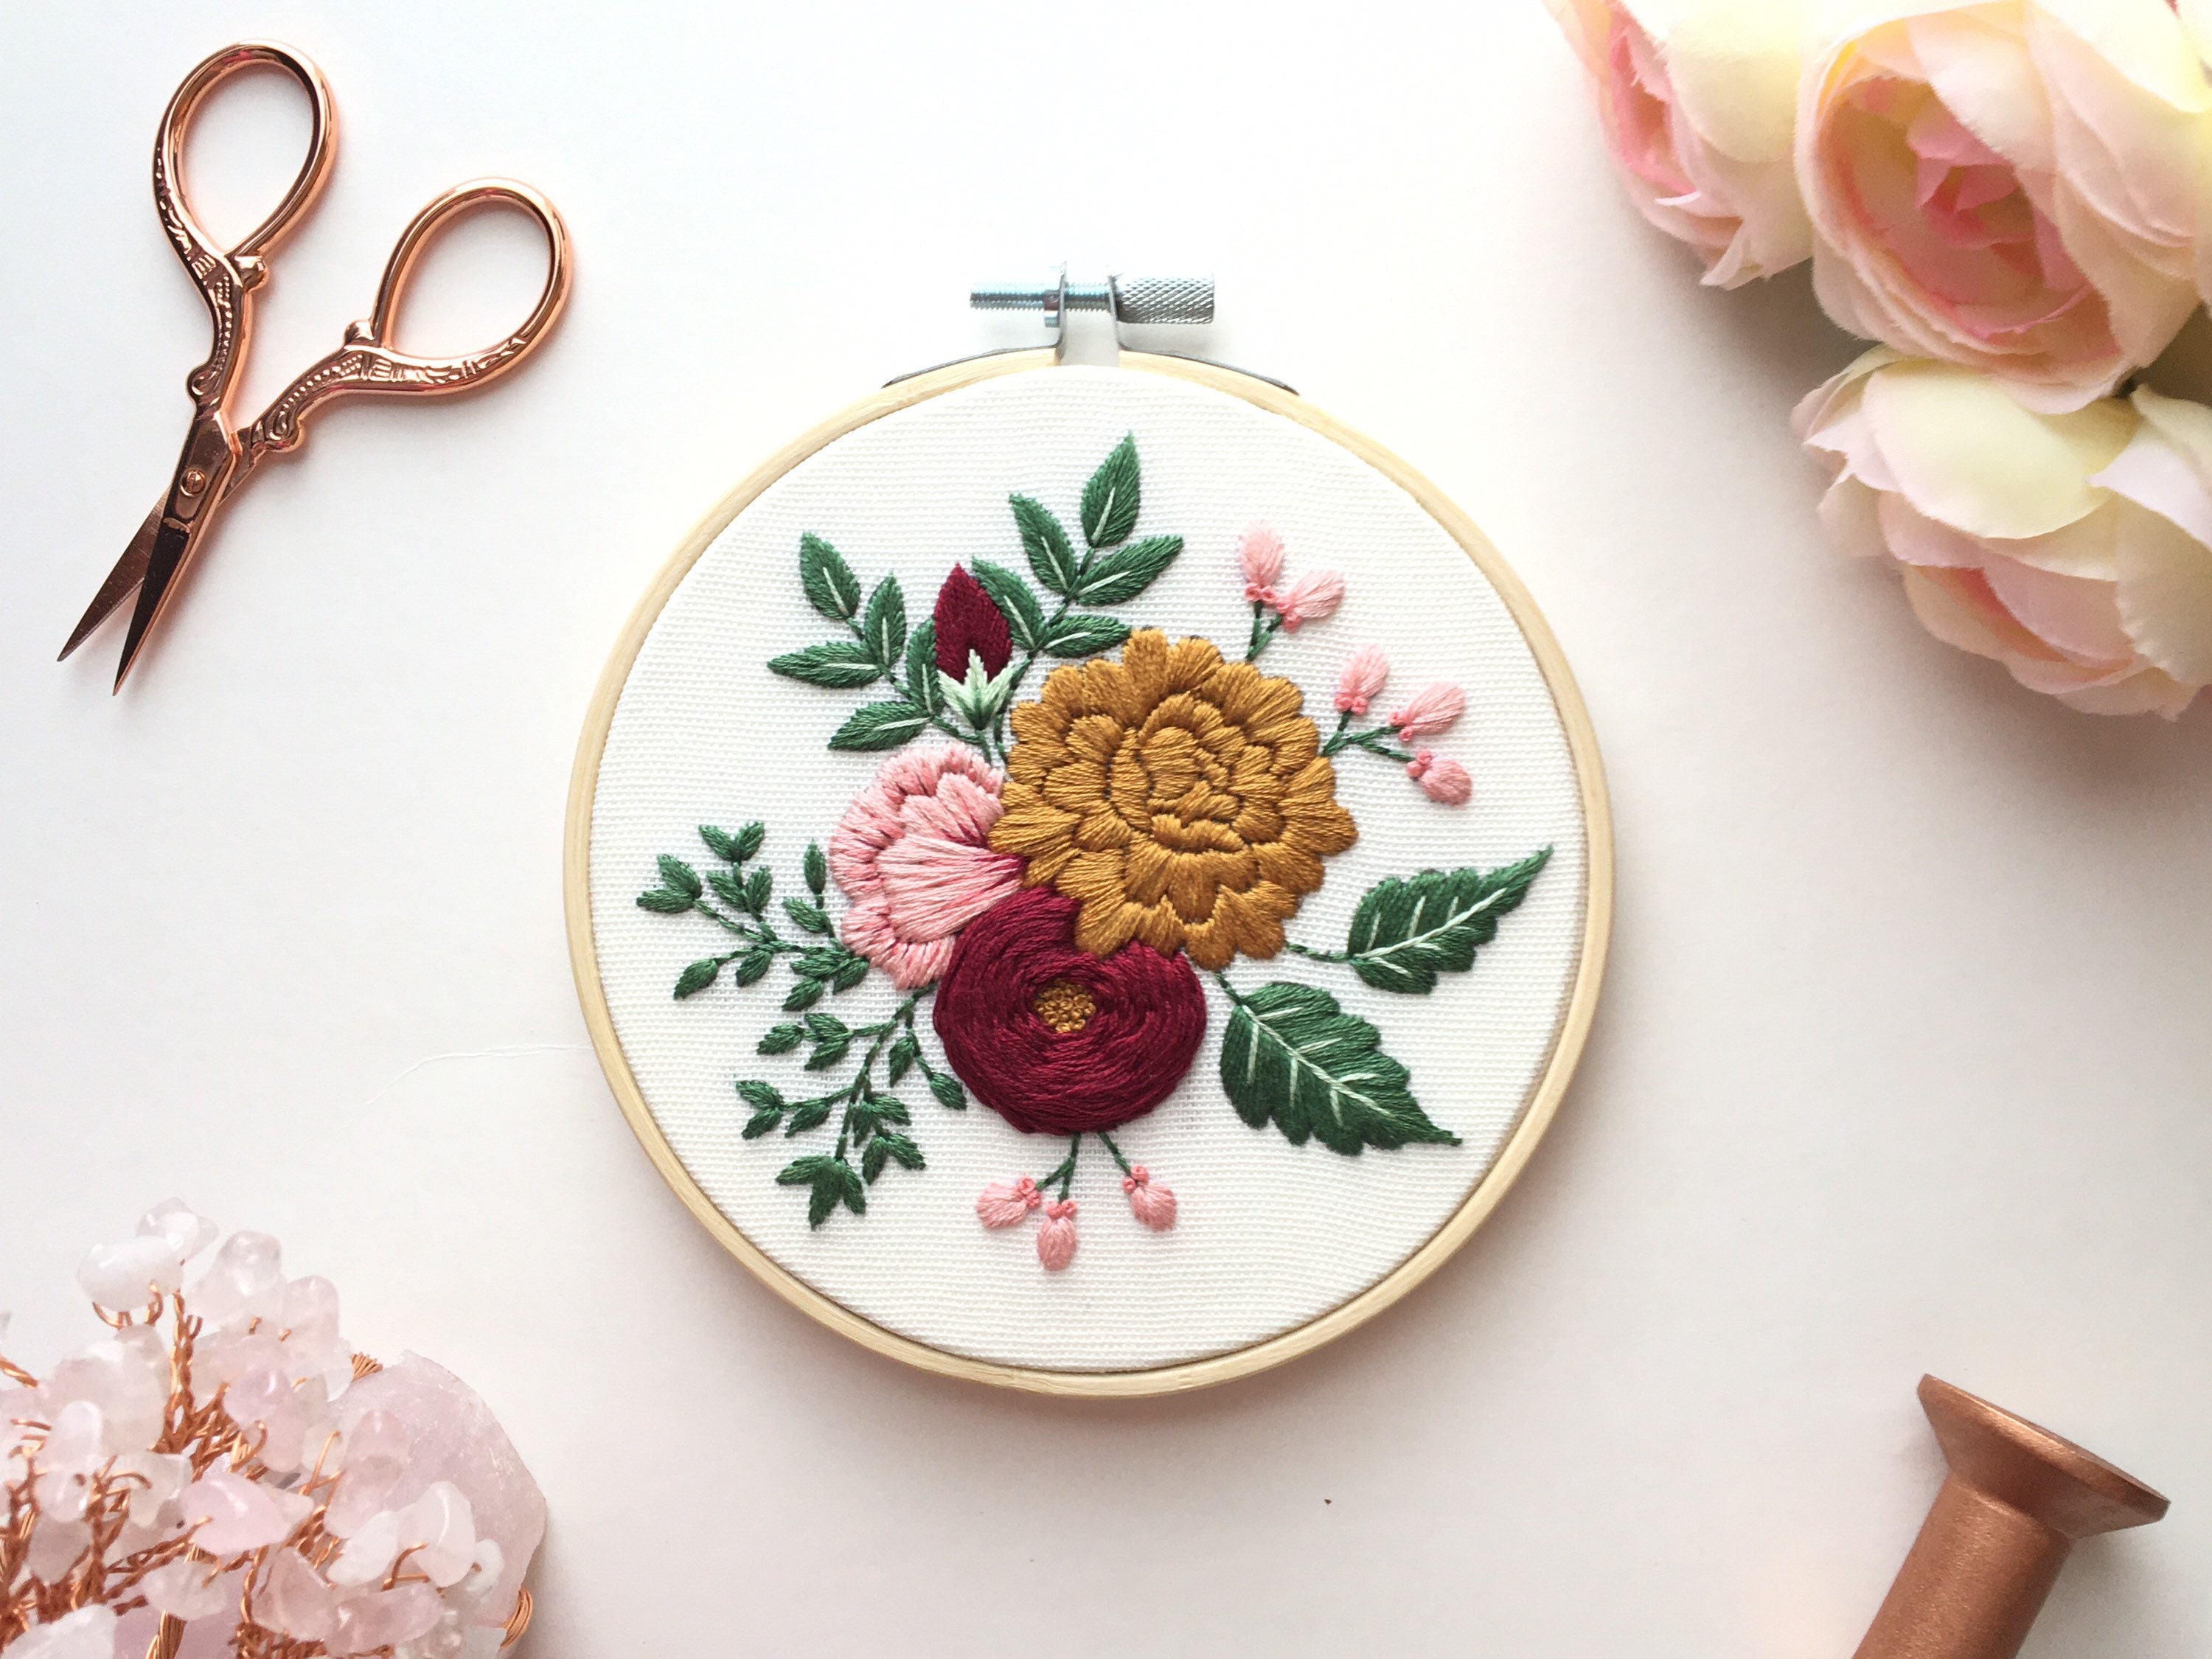 DiyerClub Crafts Embroidery Kit for Beginner - Floral Embroidery Kit with Patterns- Modern Hand Embroidery Designs - DIY Need